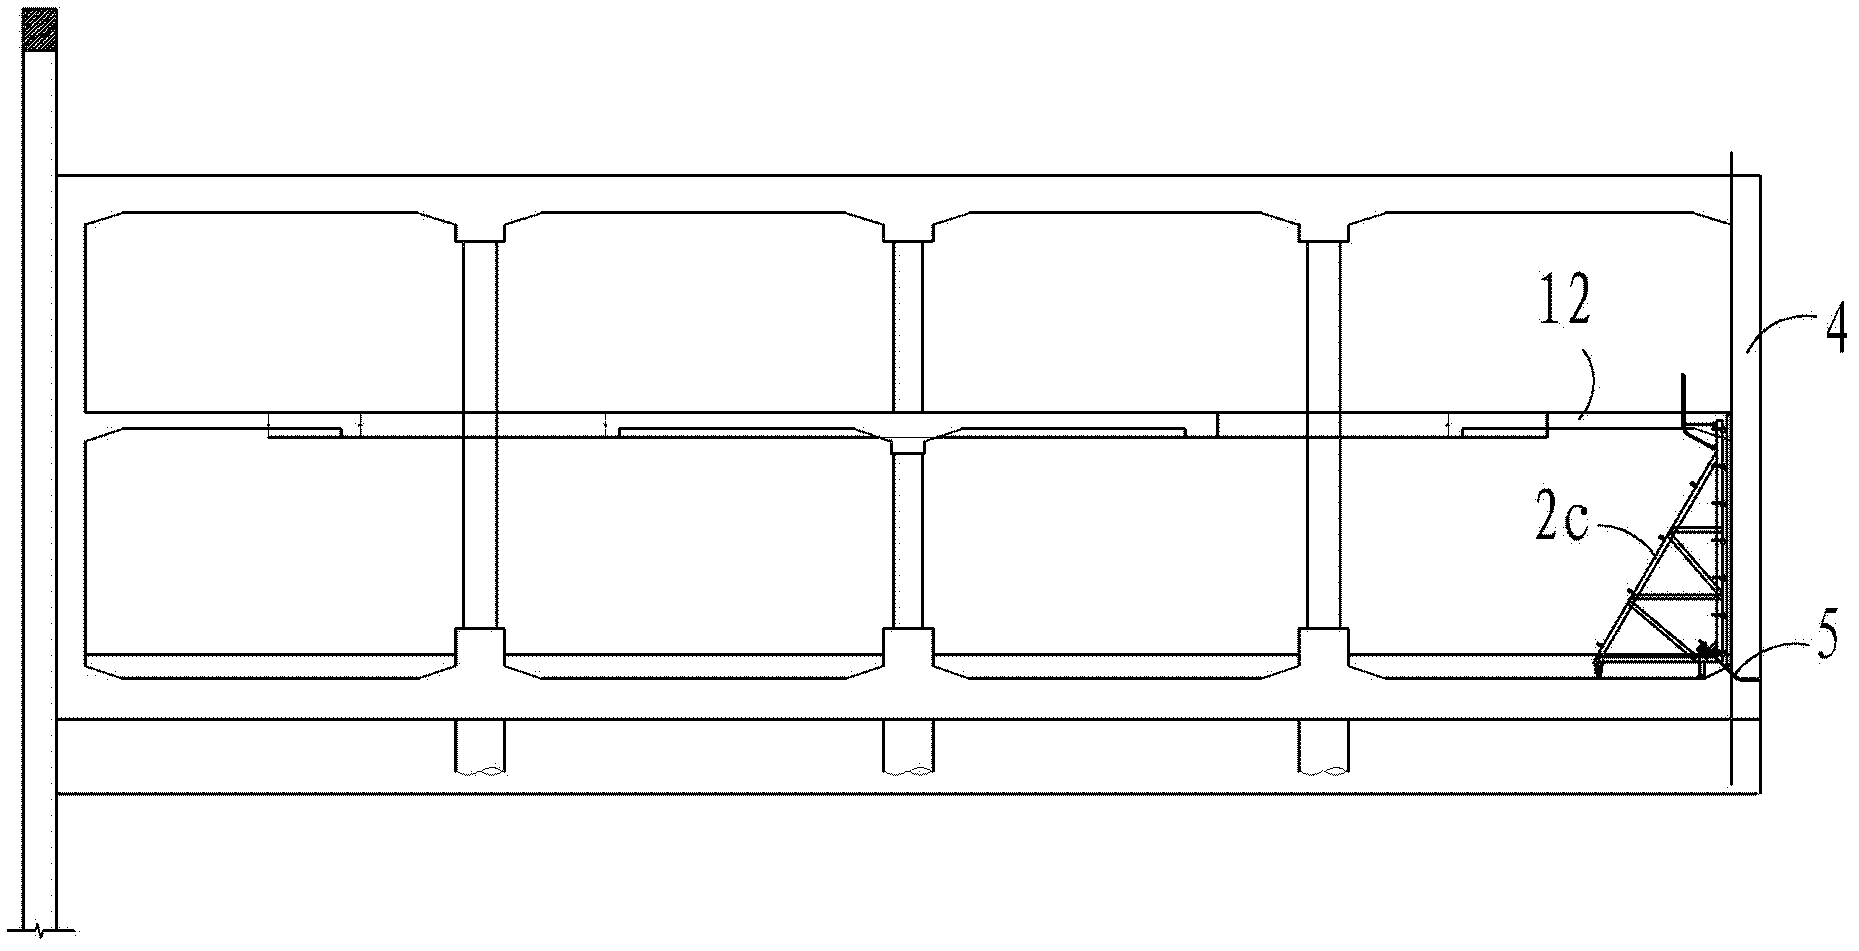 Full water stopping side wall template system